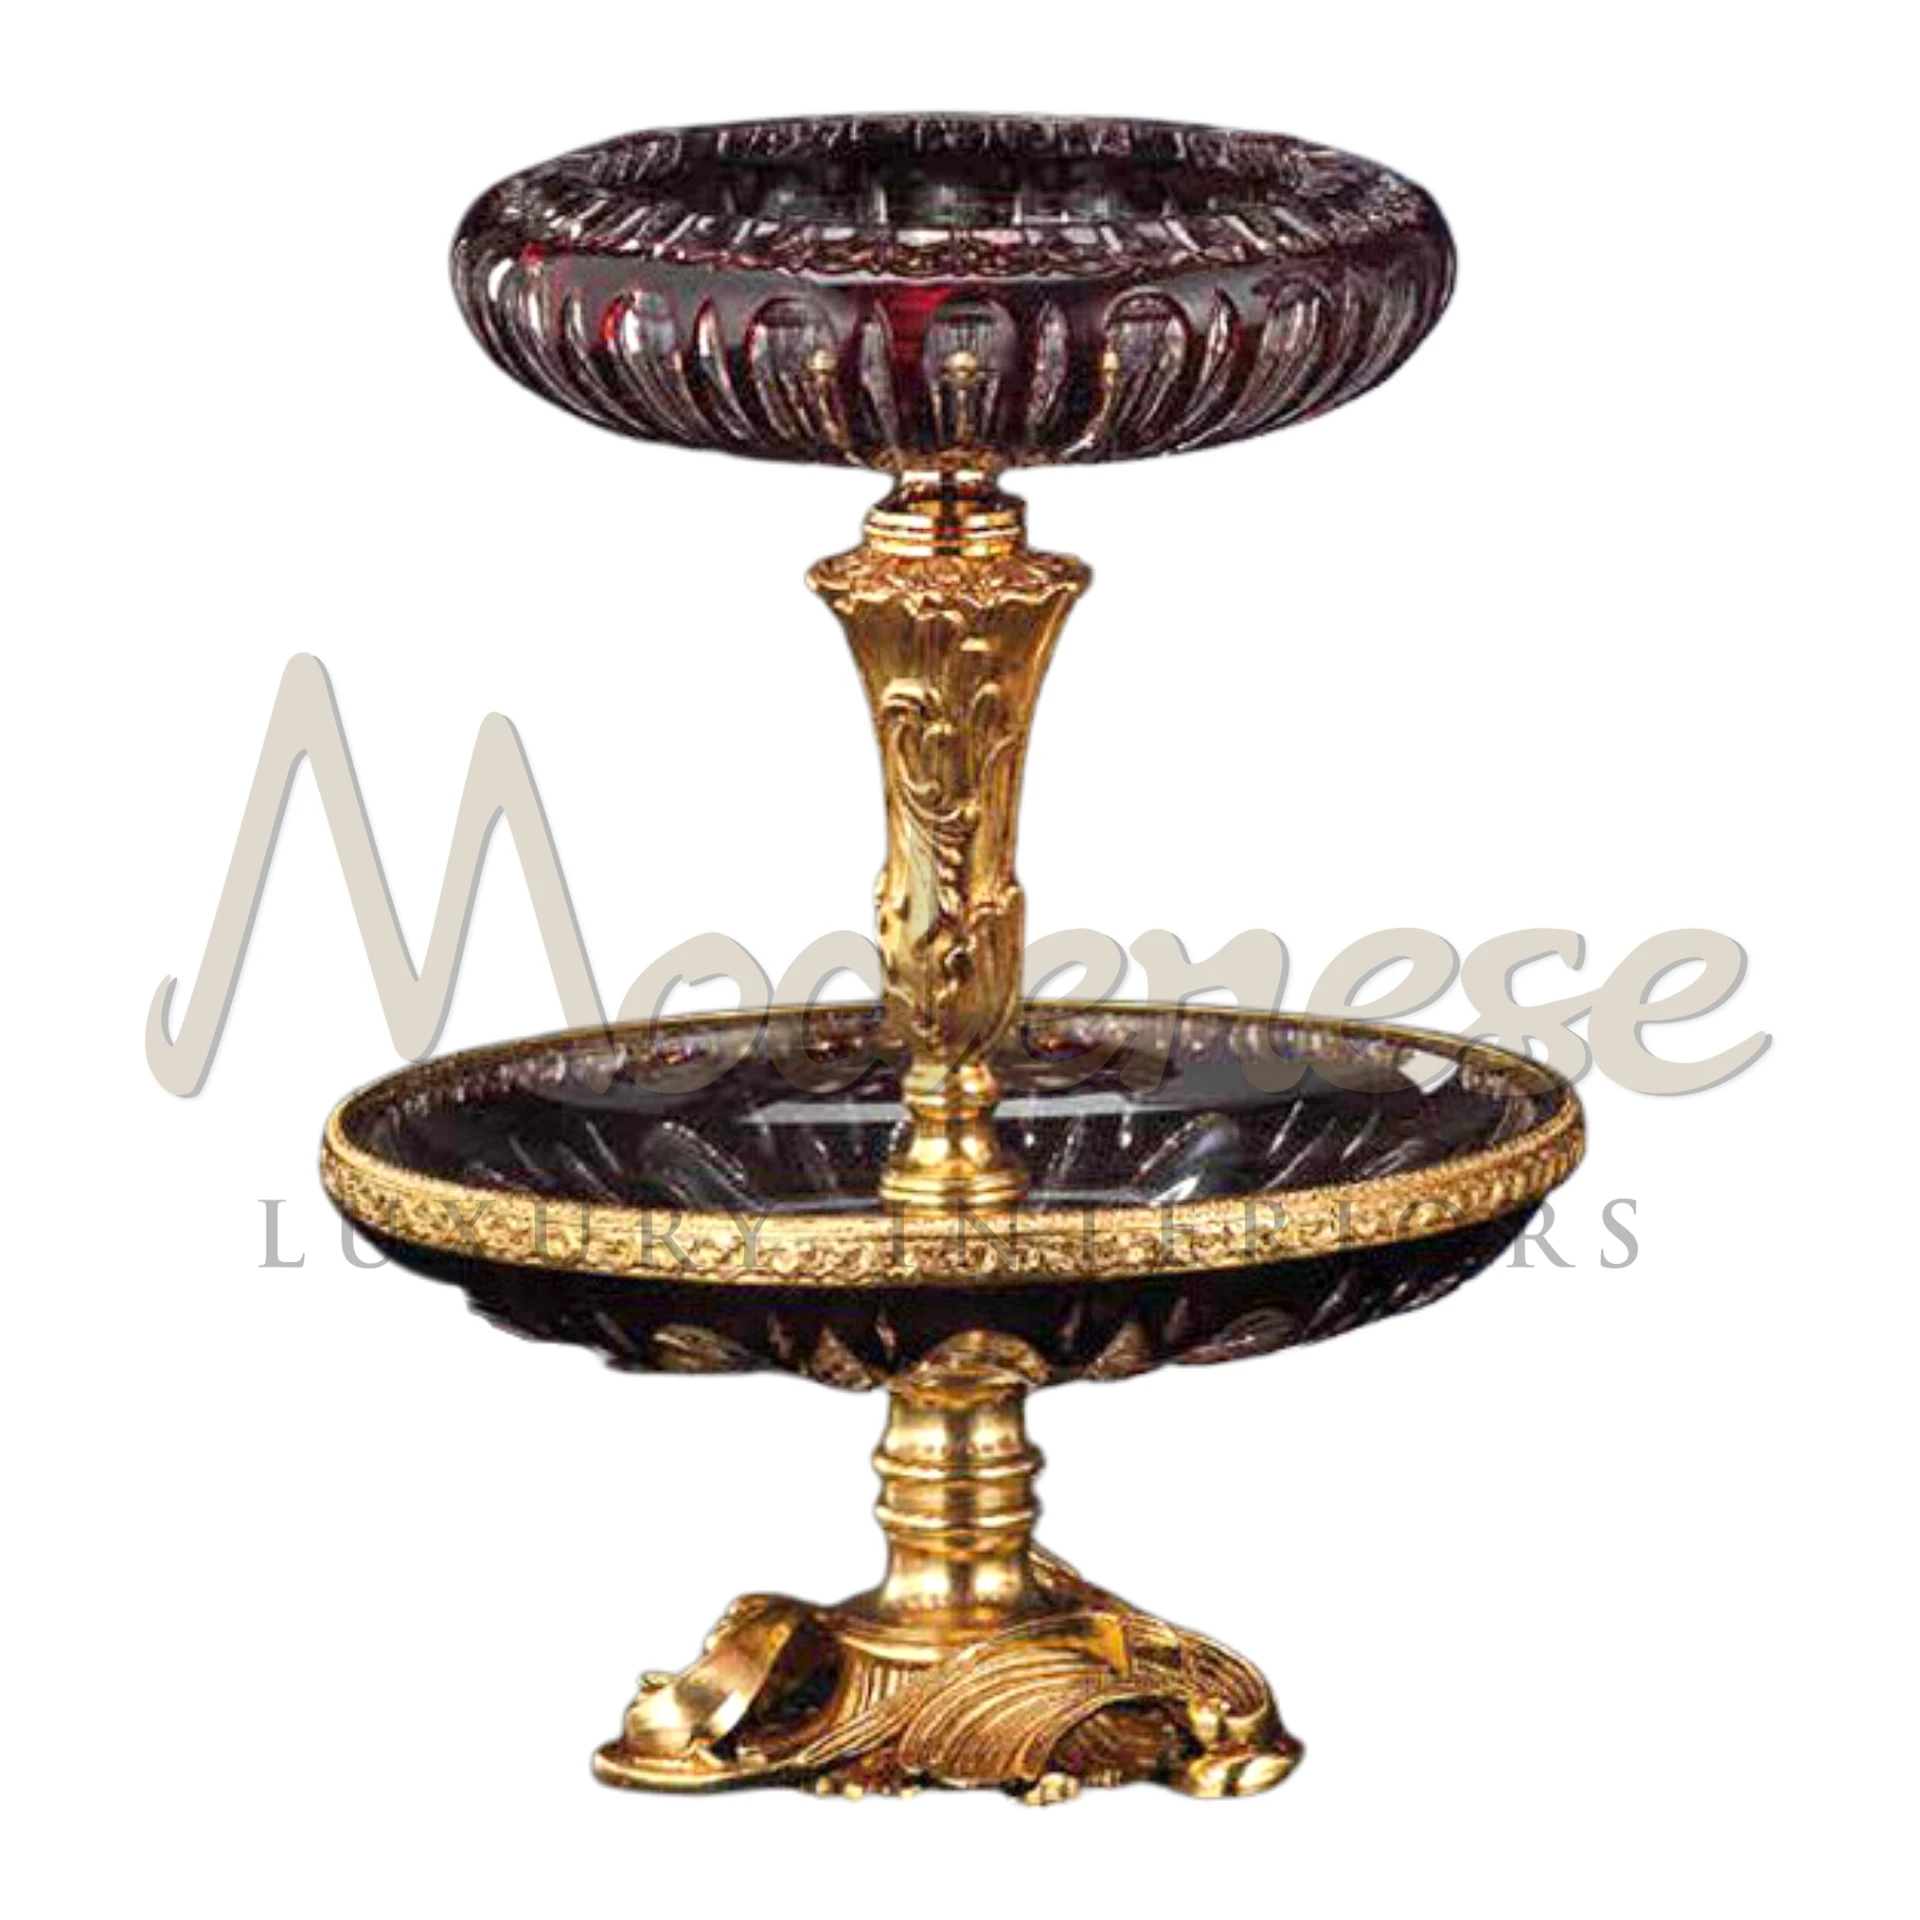 Classical Double Deck Pedestal Bowl, ideal for luxury interiors, serves dual purposes with its two-tier design for candies or as a decorative centerpiece.






